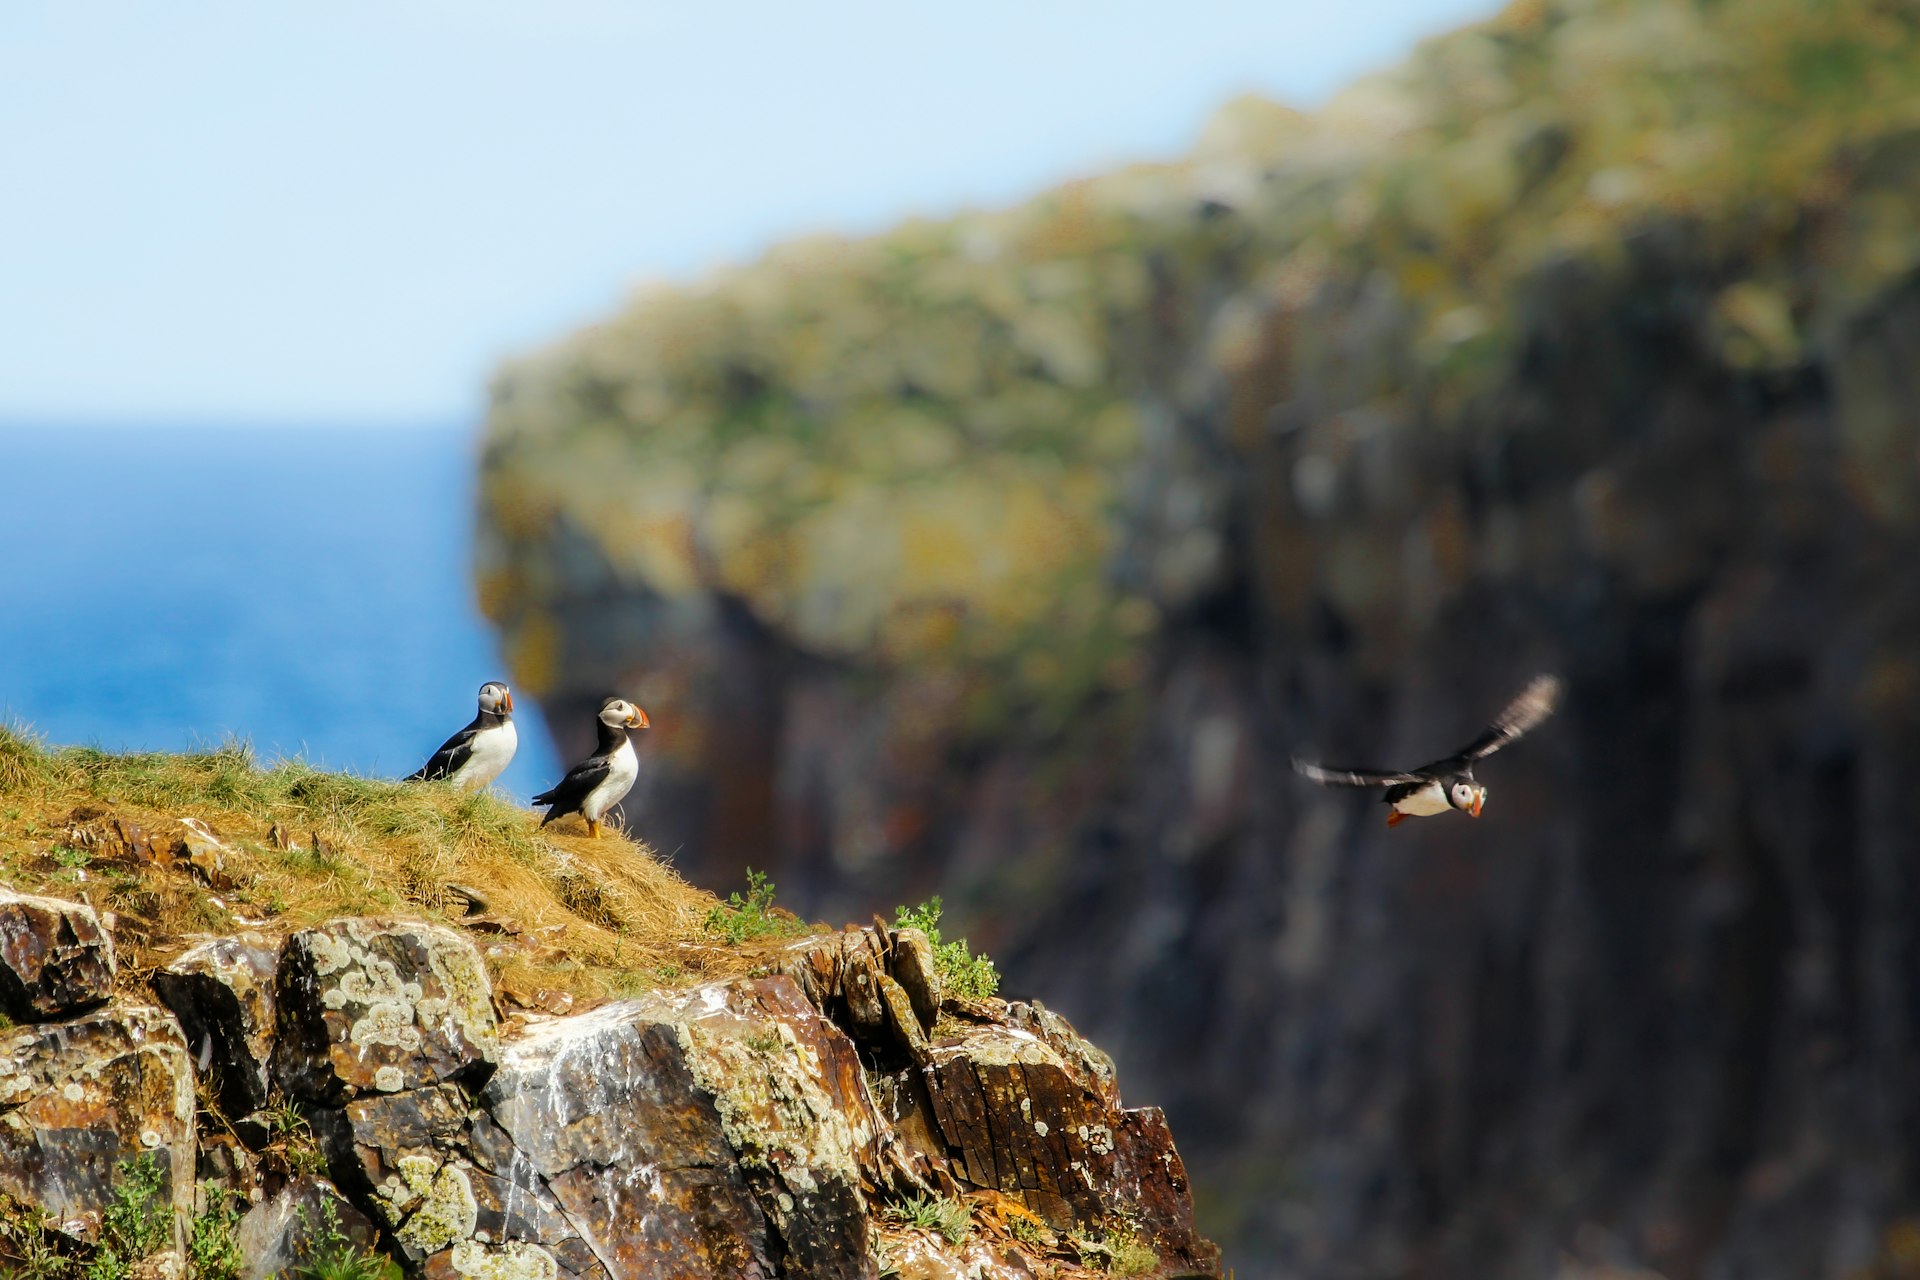 Three puffins, two sitting in grass on rocky ledge and one flying past, in Newfoundland, Canada